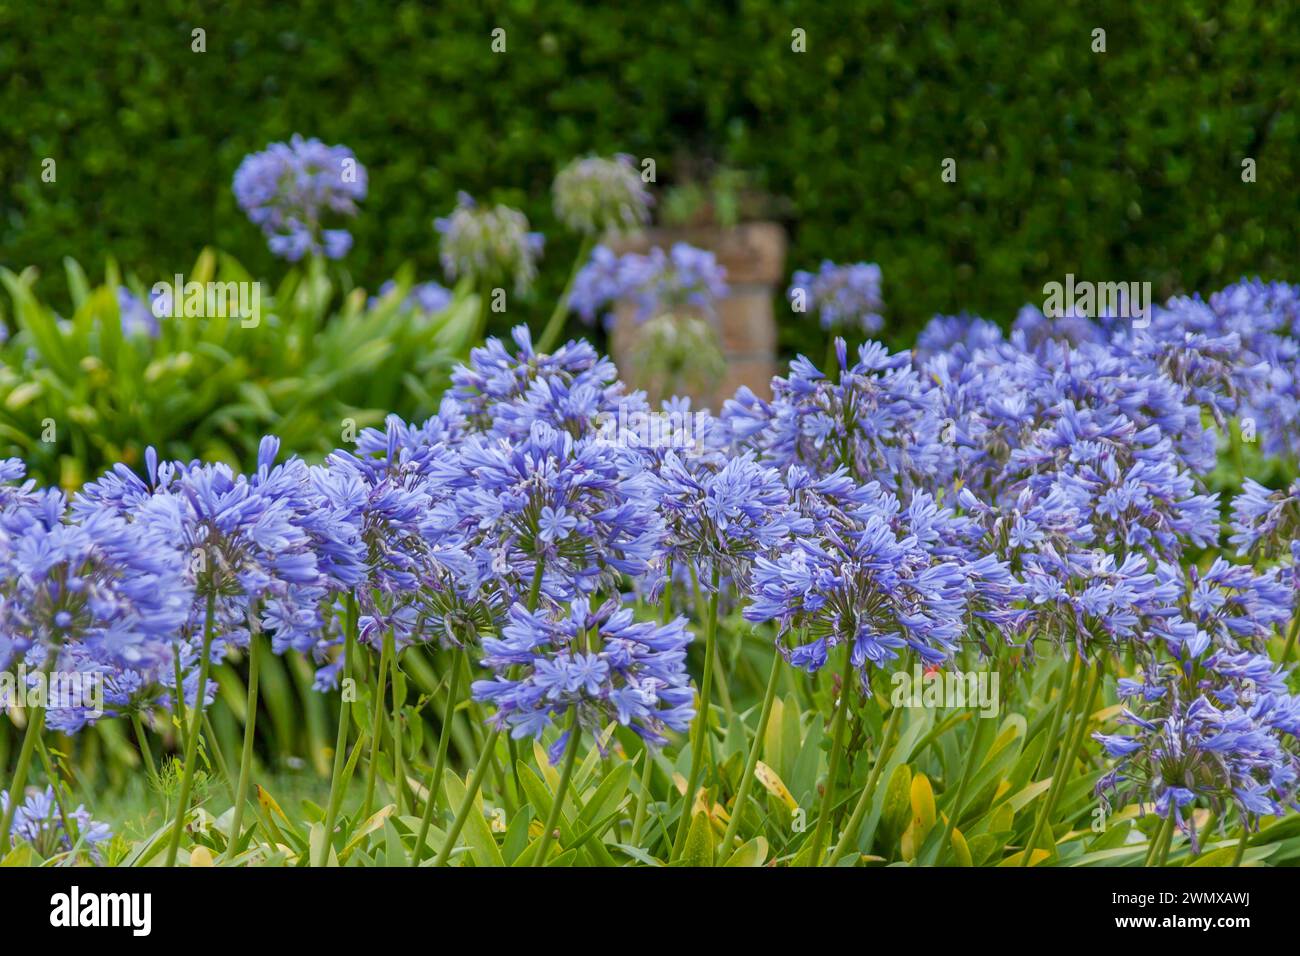 Lilies of the nile (Agapanthus), Brittany, France Stock Photo